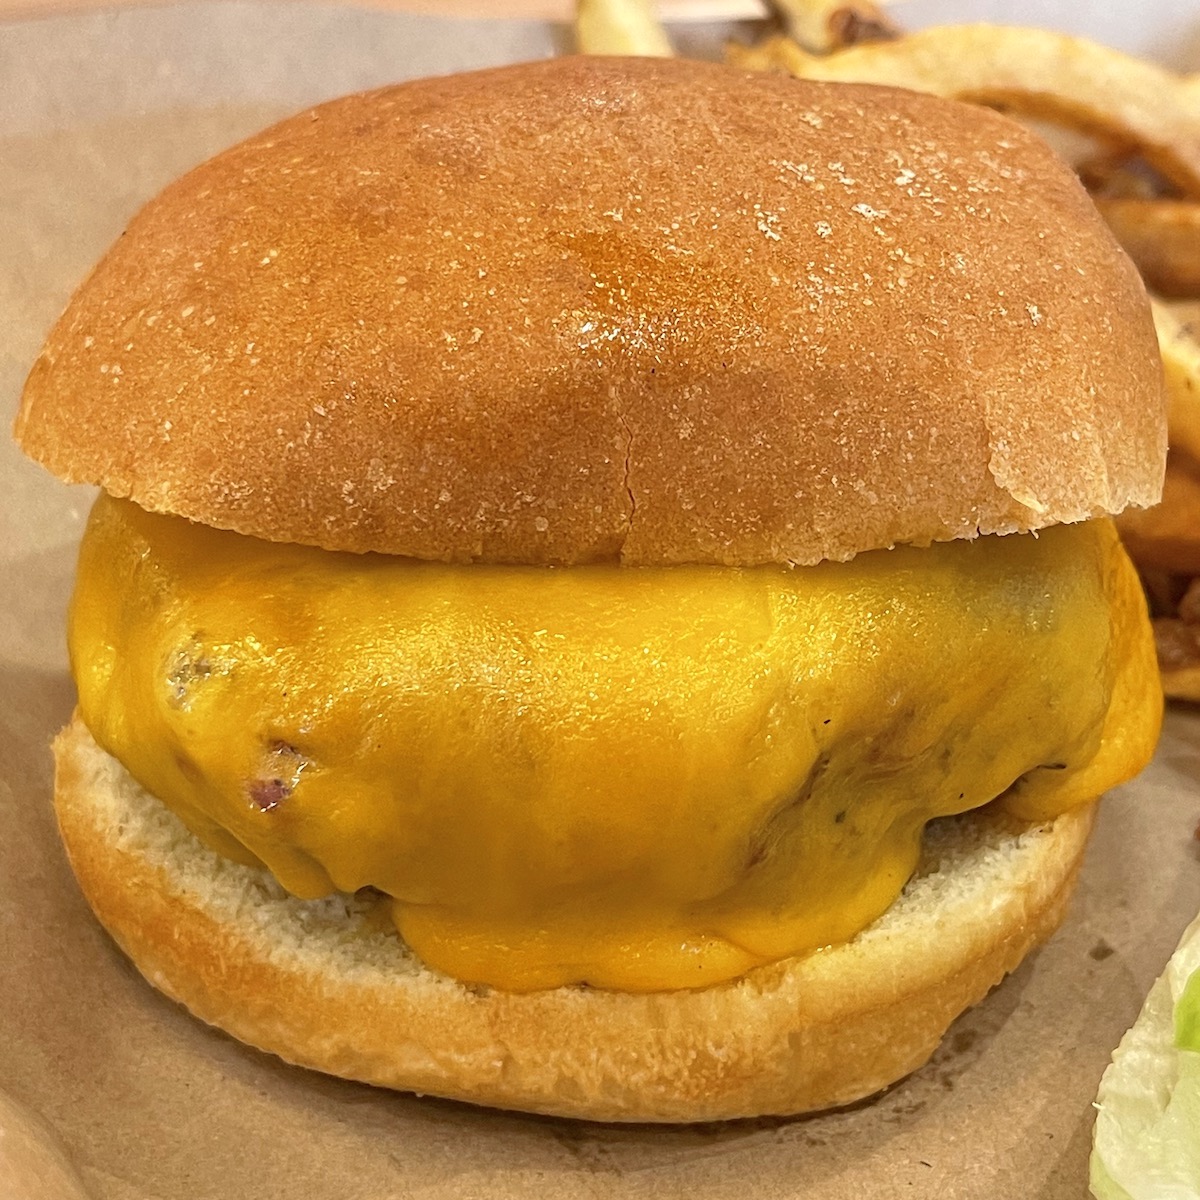 Smoked Cheeseburger from Mission BBQ in Doral, Florida